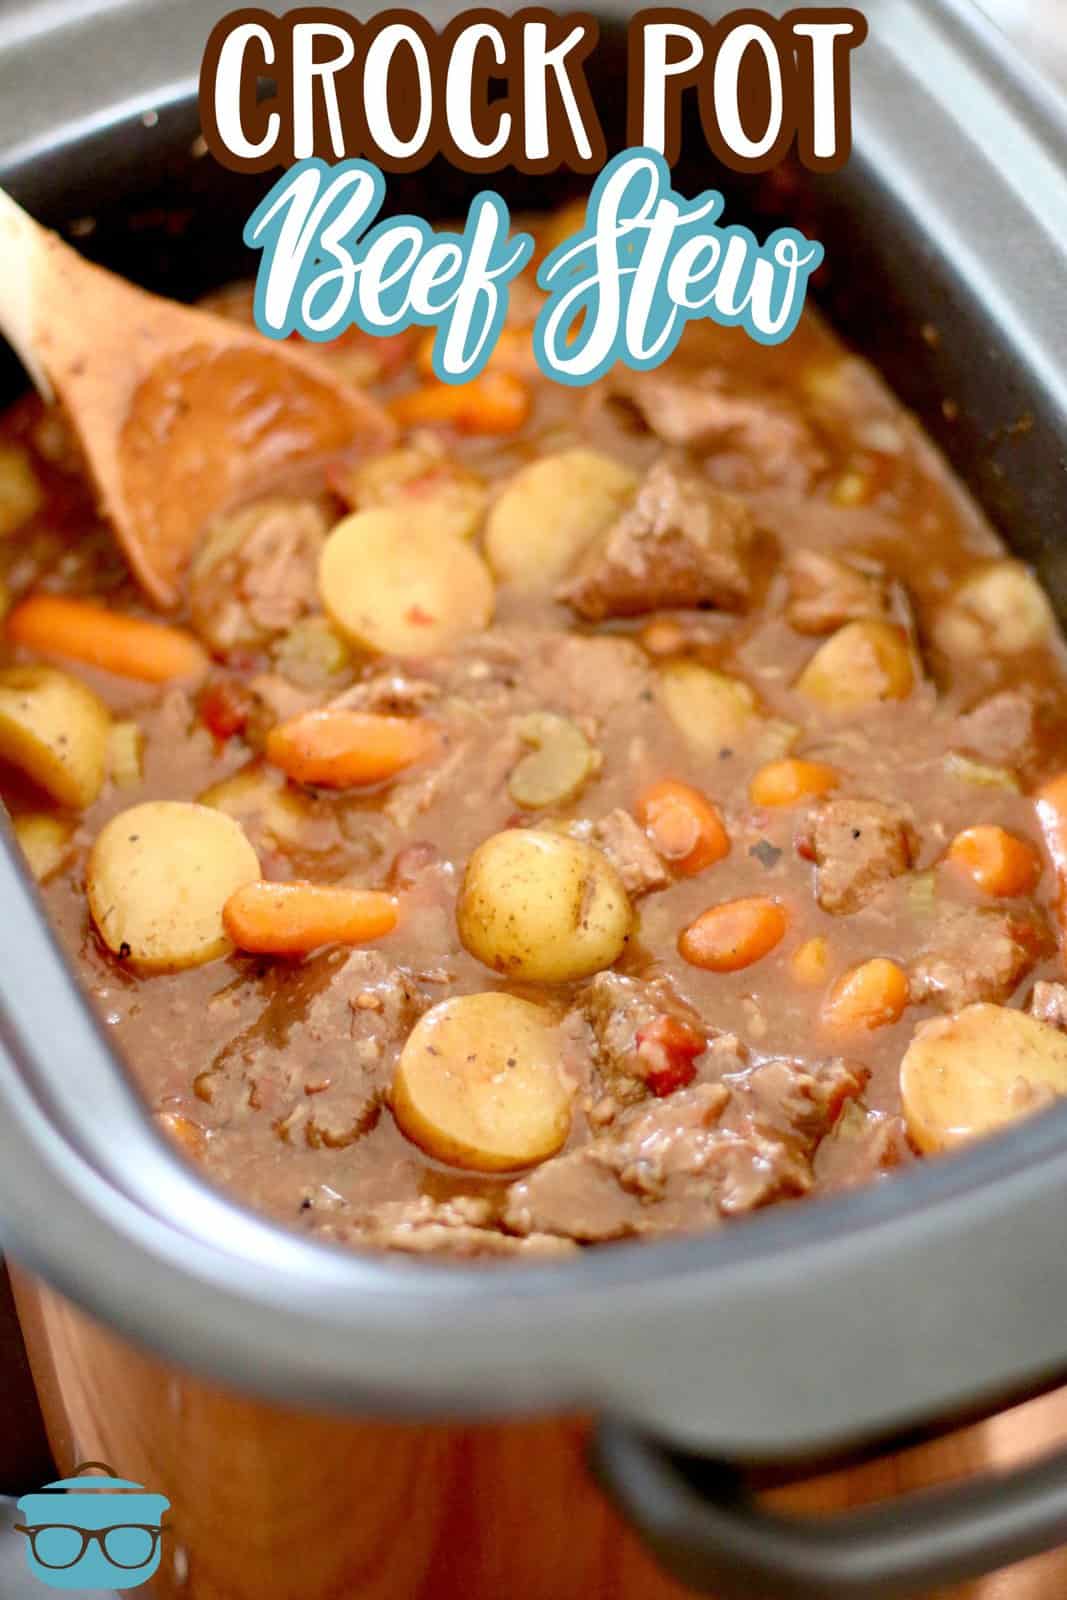 beef stew shown in an oval slow cooker with a wooden spoon inserted into the beef stew.